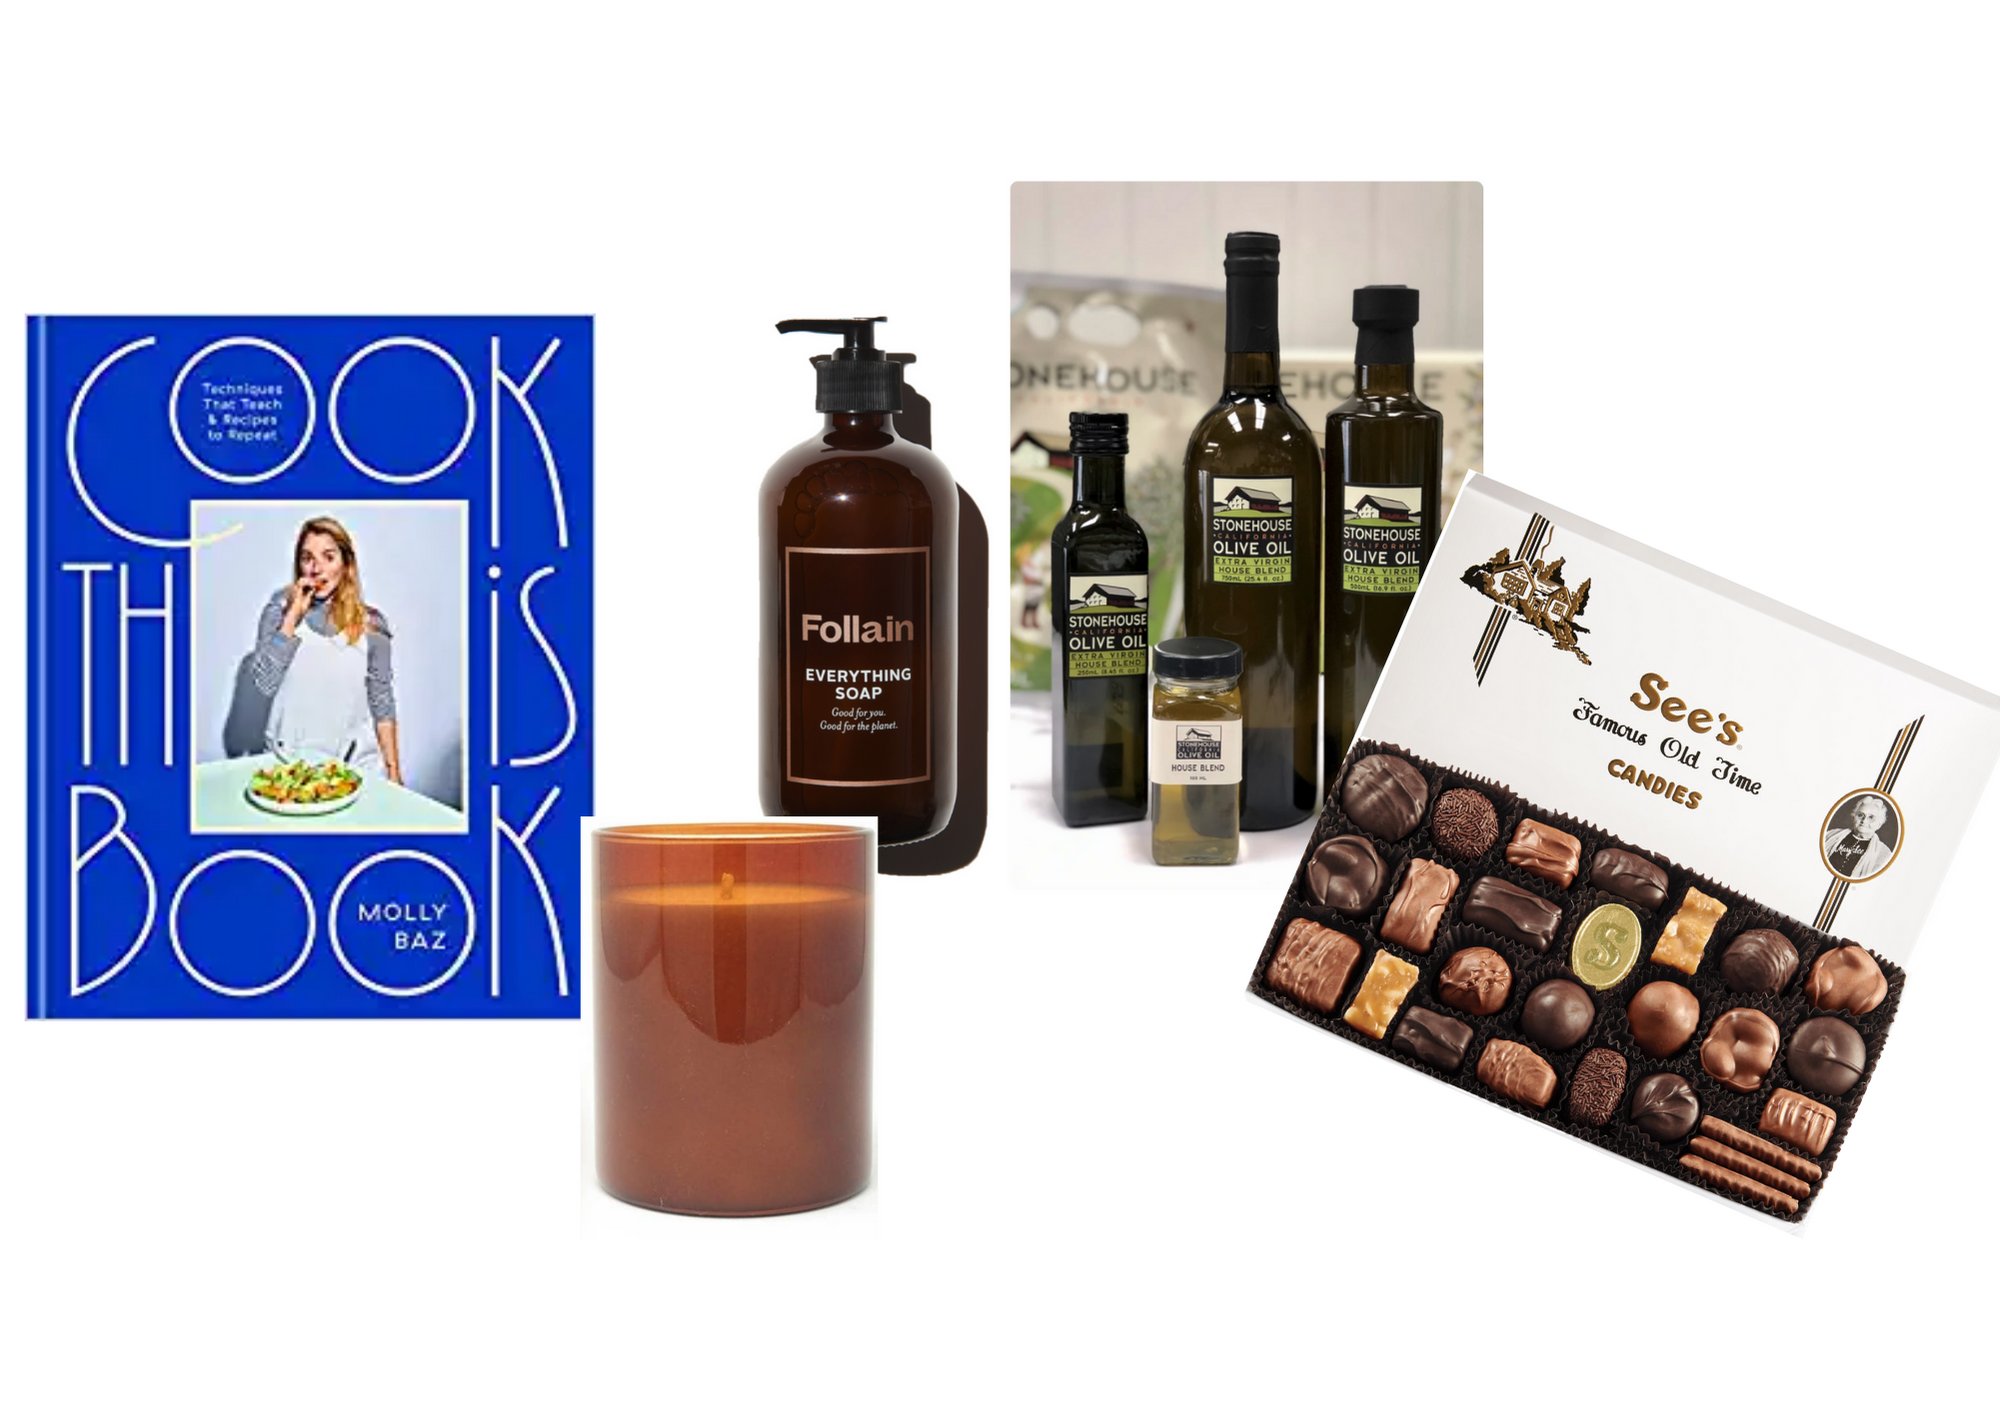 a series of housewarming gifts including a cook book, candle, soap, olive oil and chocolates